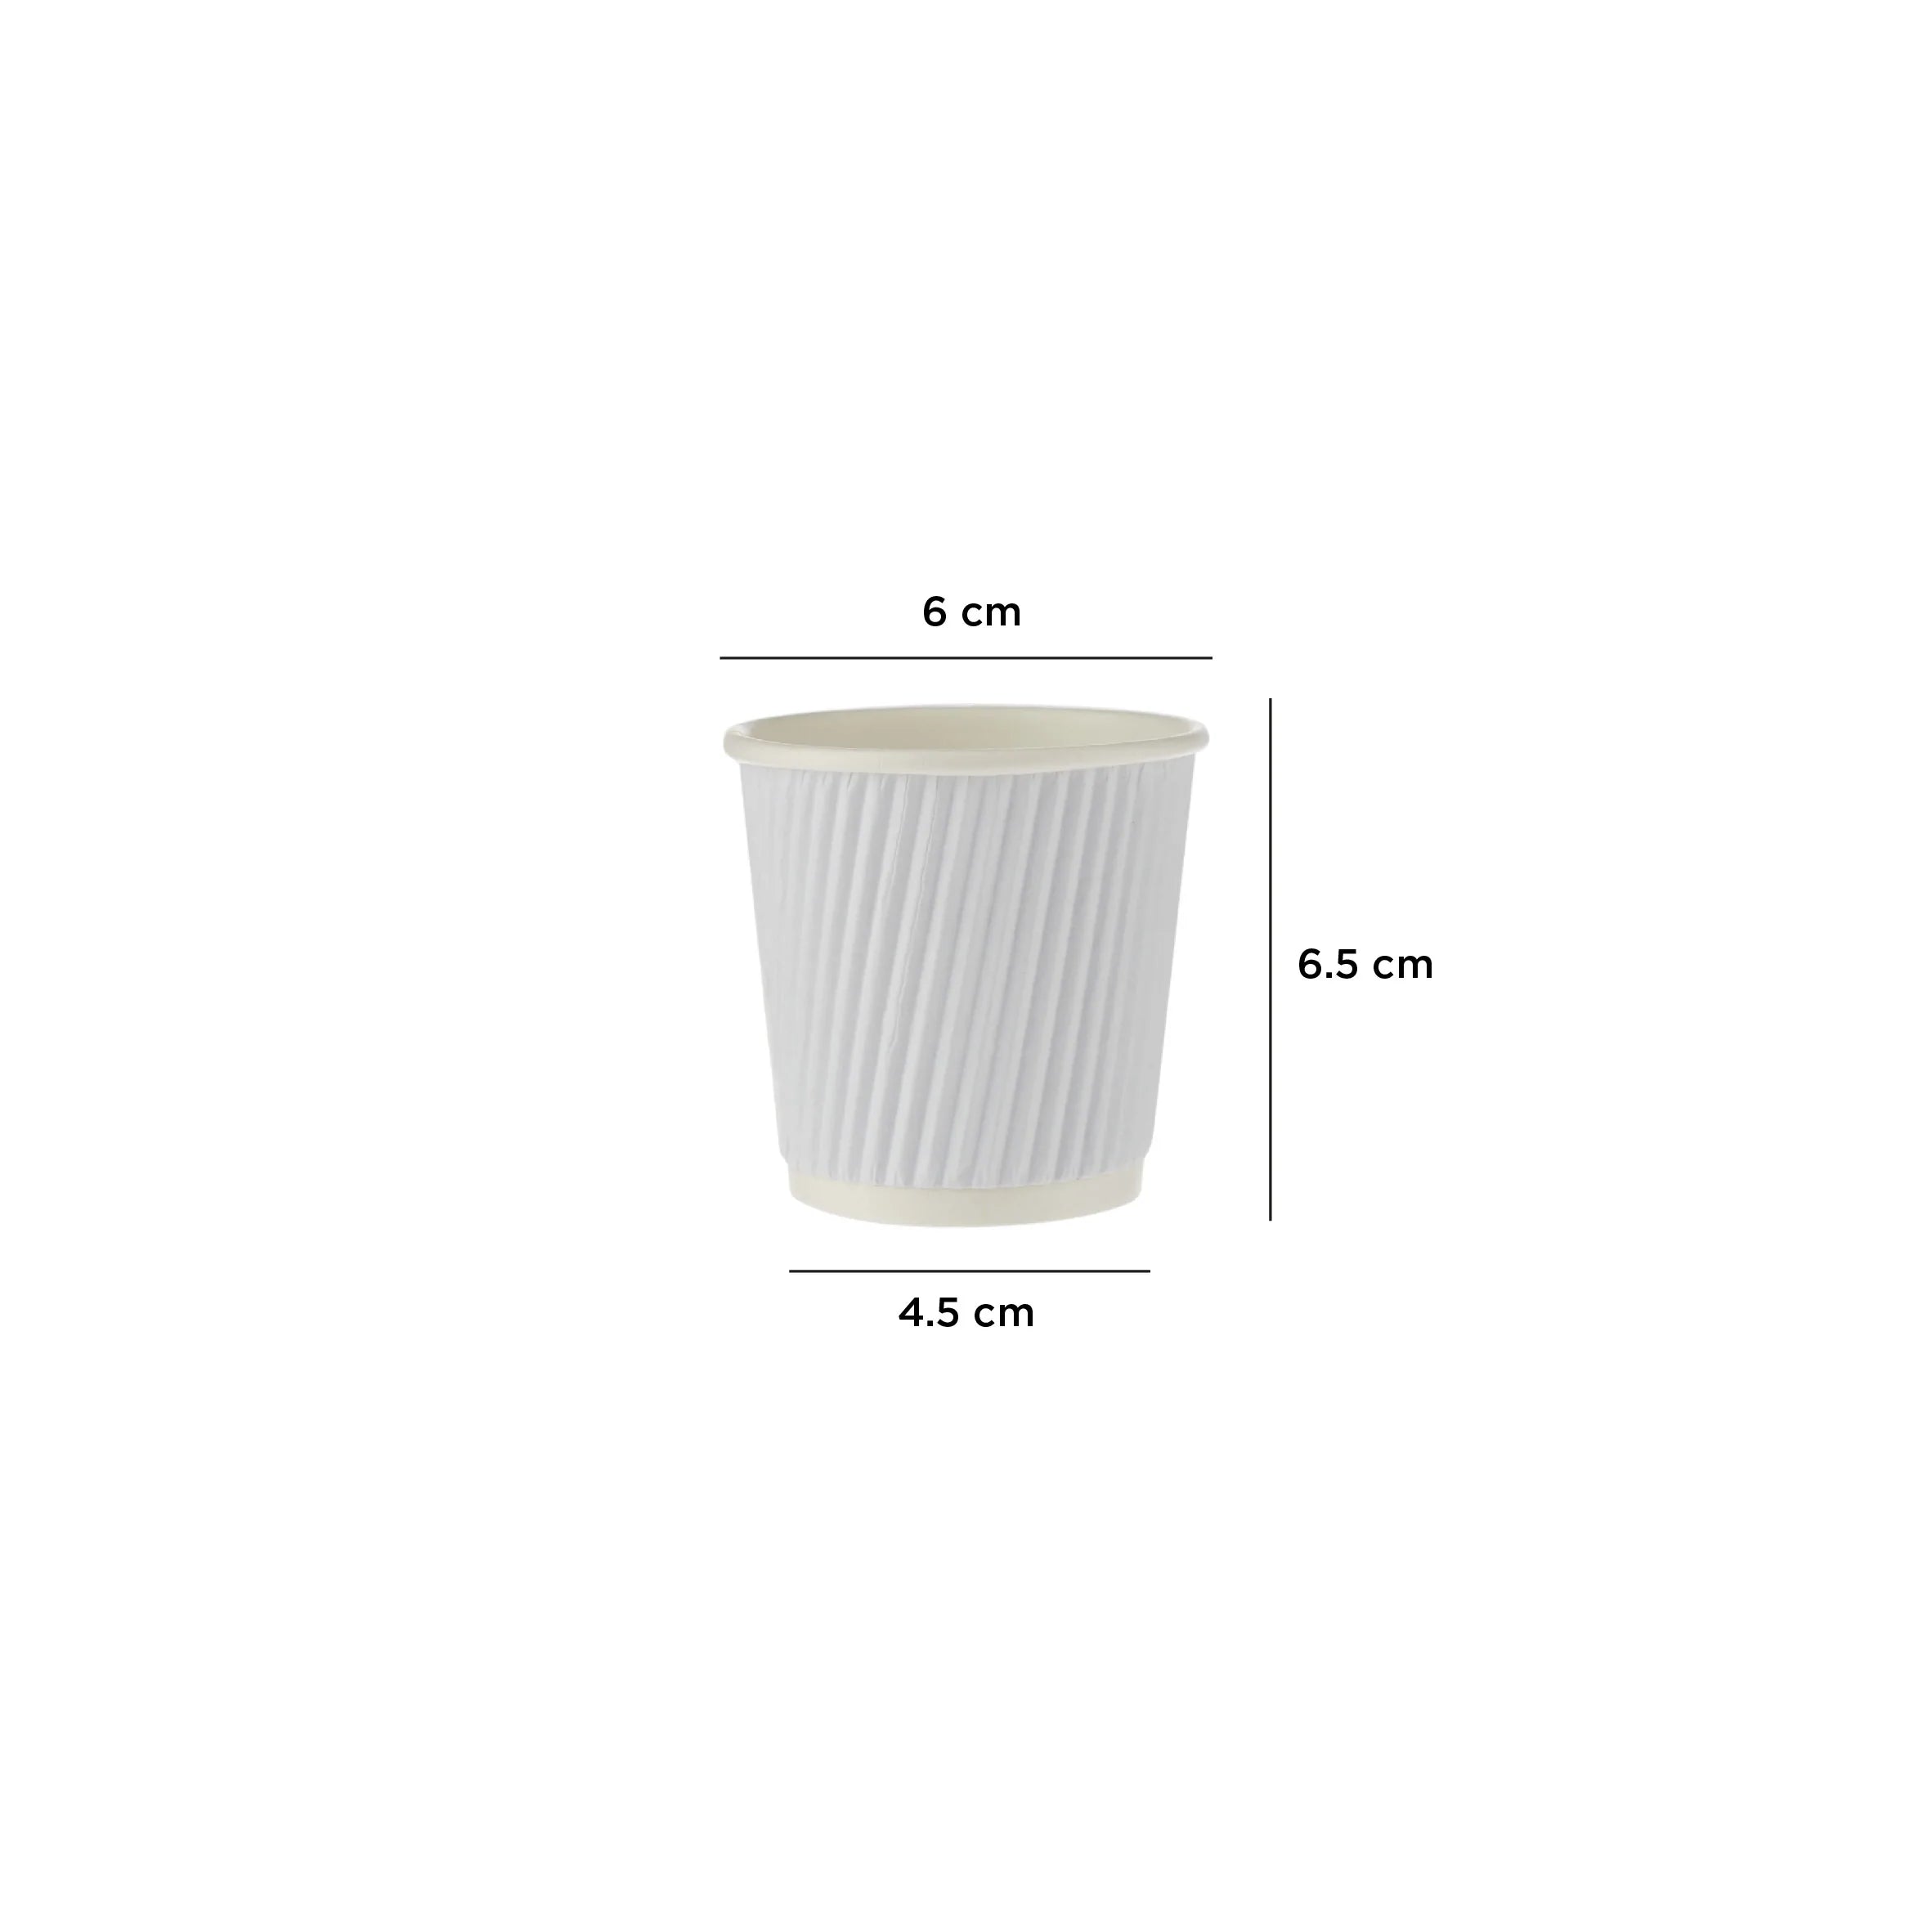 1000 Pieces White Ripple Cup 4 OZ (120ML)